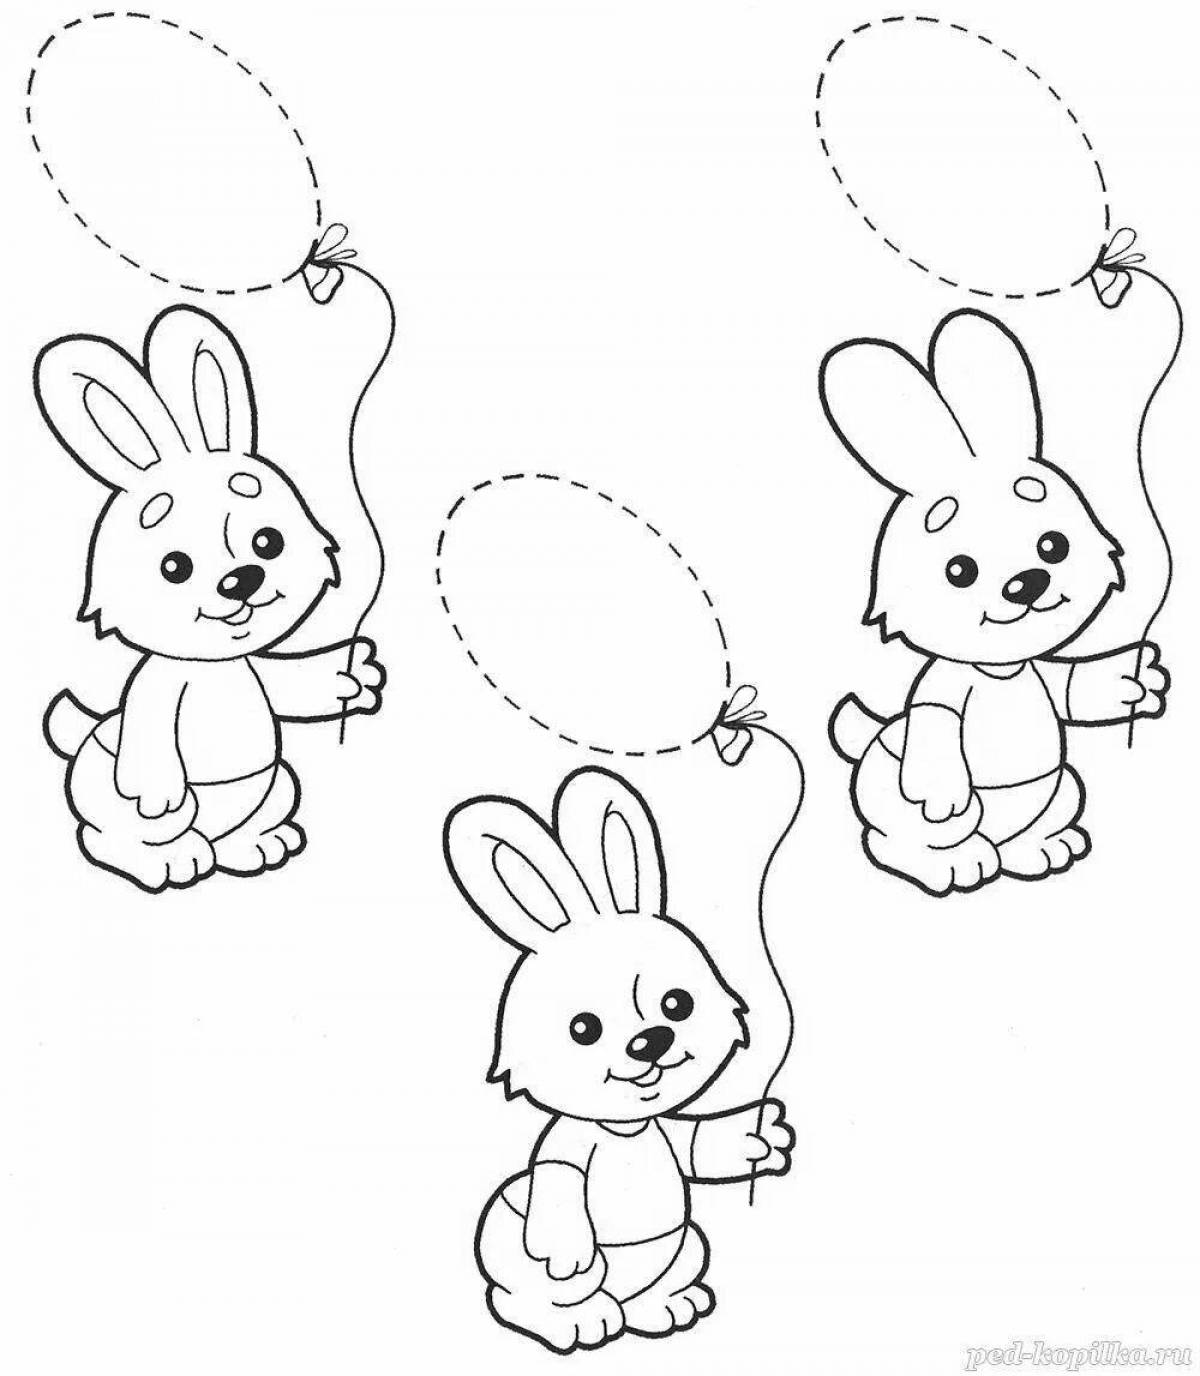 Great rabbit coloring book for 2 year olds